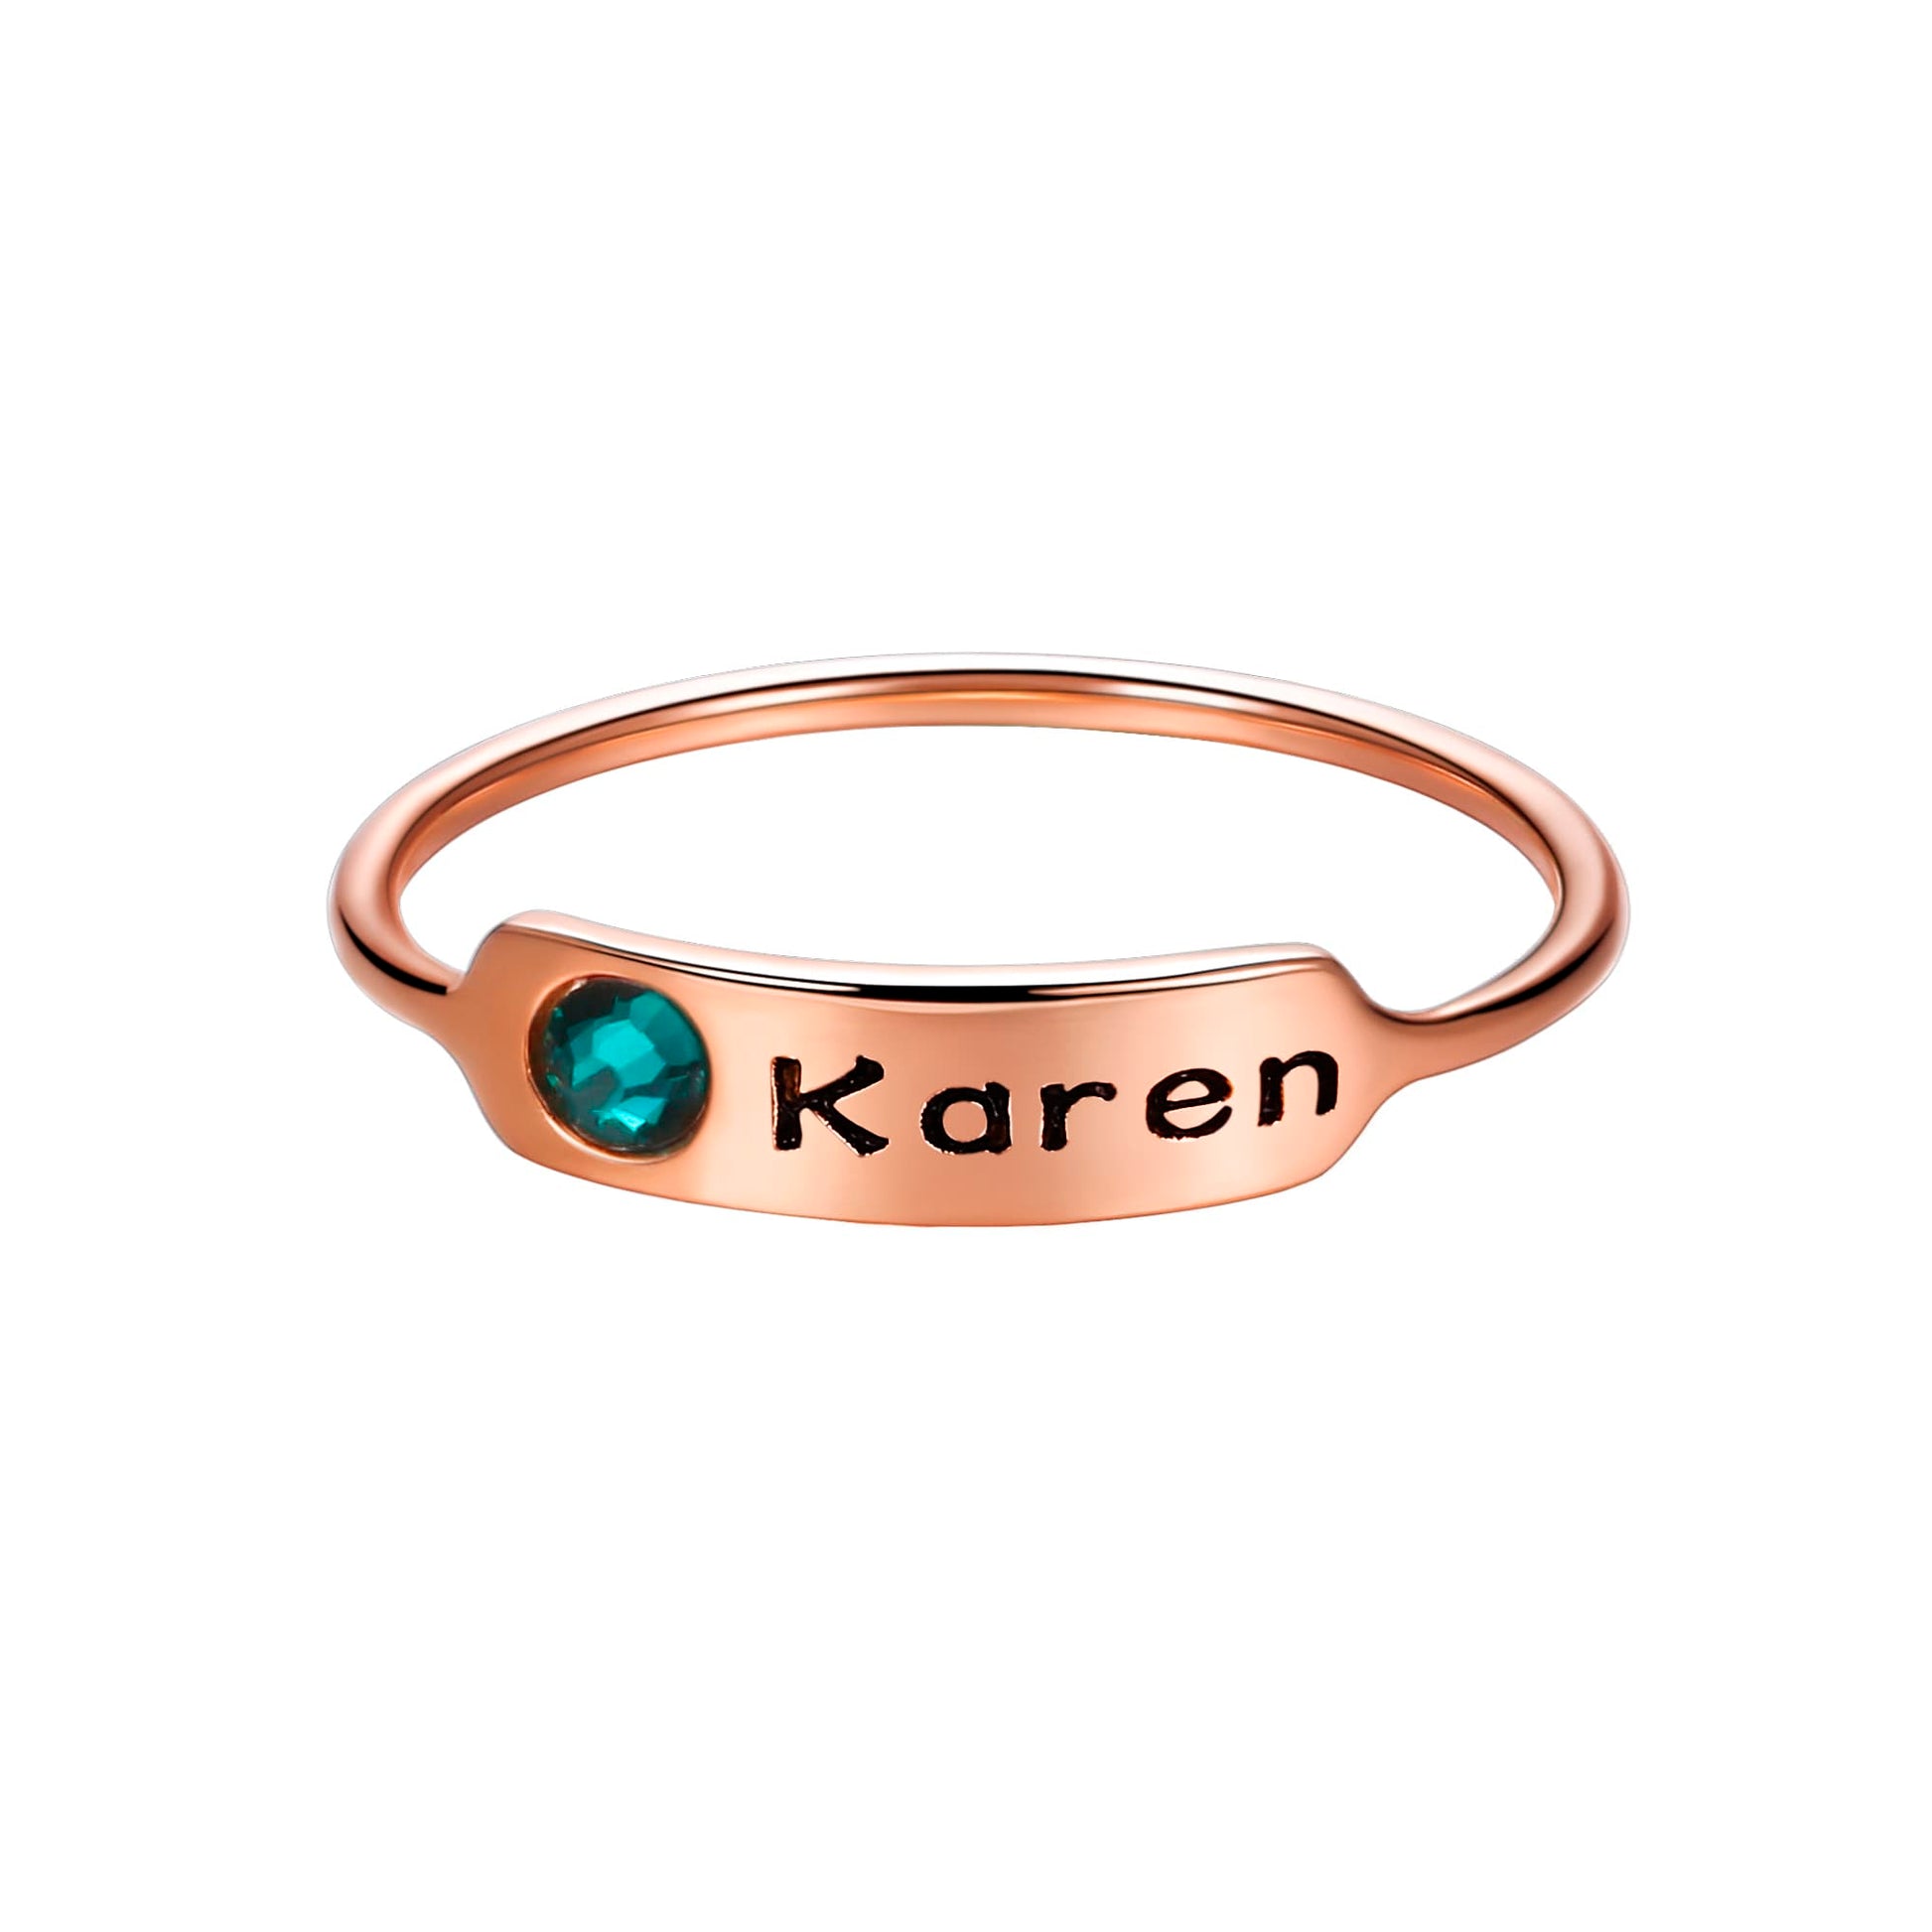 Birthstonesjewelry Personalized Birthstone Name Ring Rose Gold